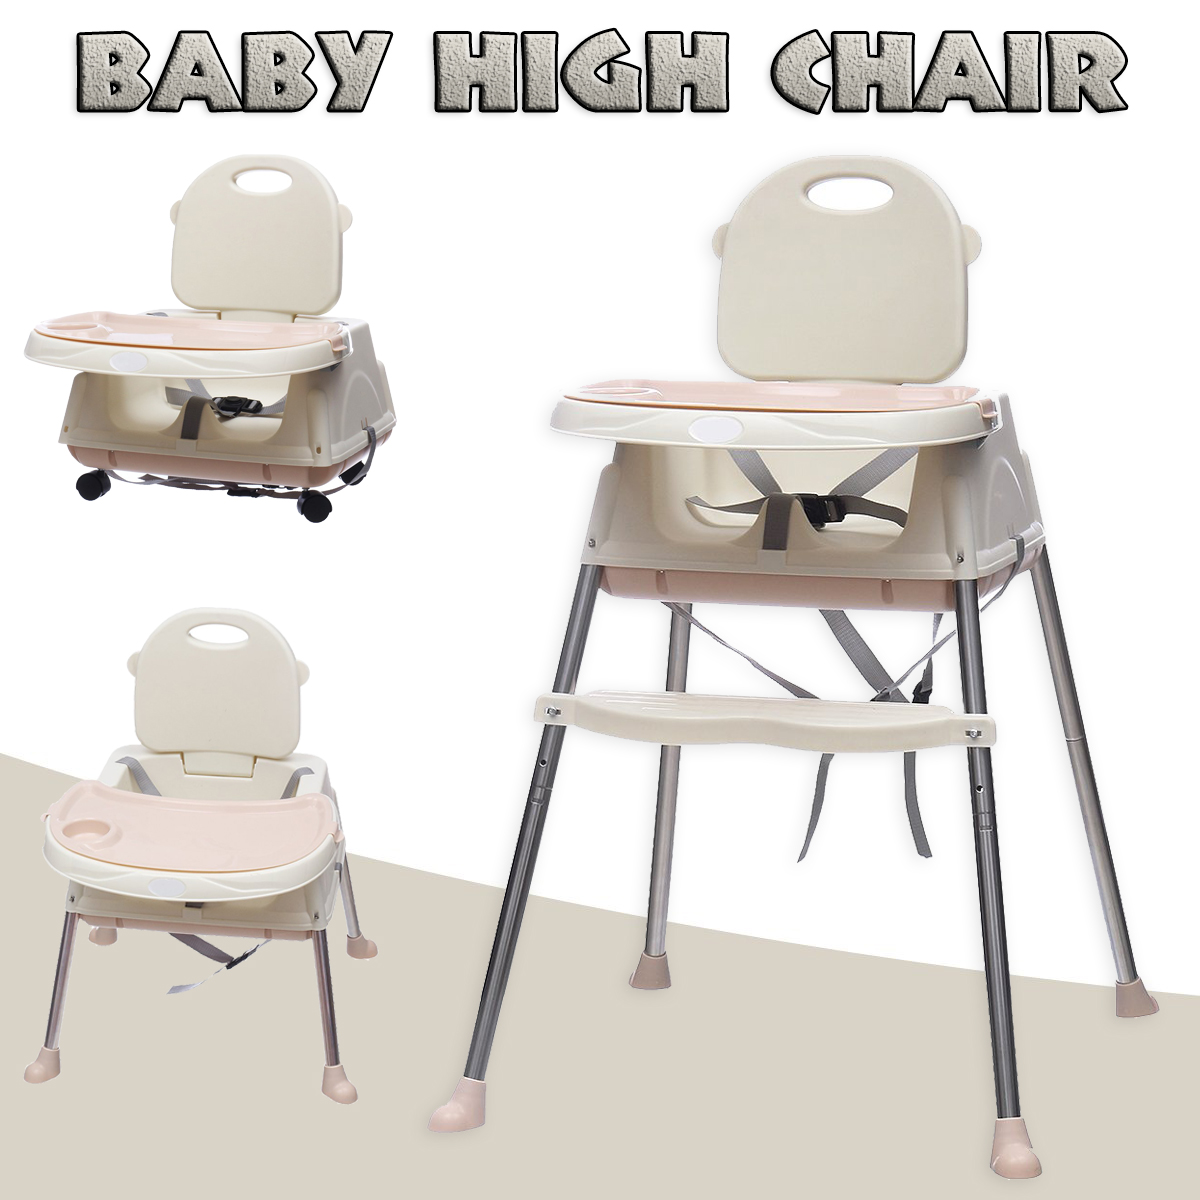 Folding-Baby-High-Chair-Convertible-Play-Table-Seat-Booster-Toddler-Feeding-Tray-Wheel-1556091